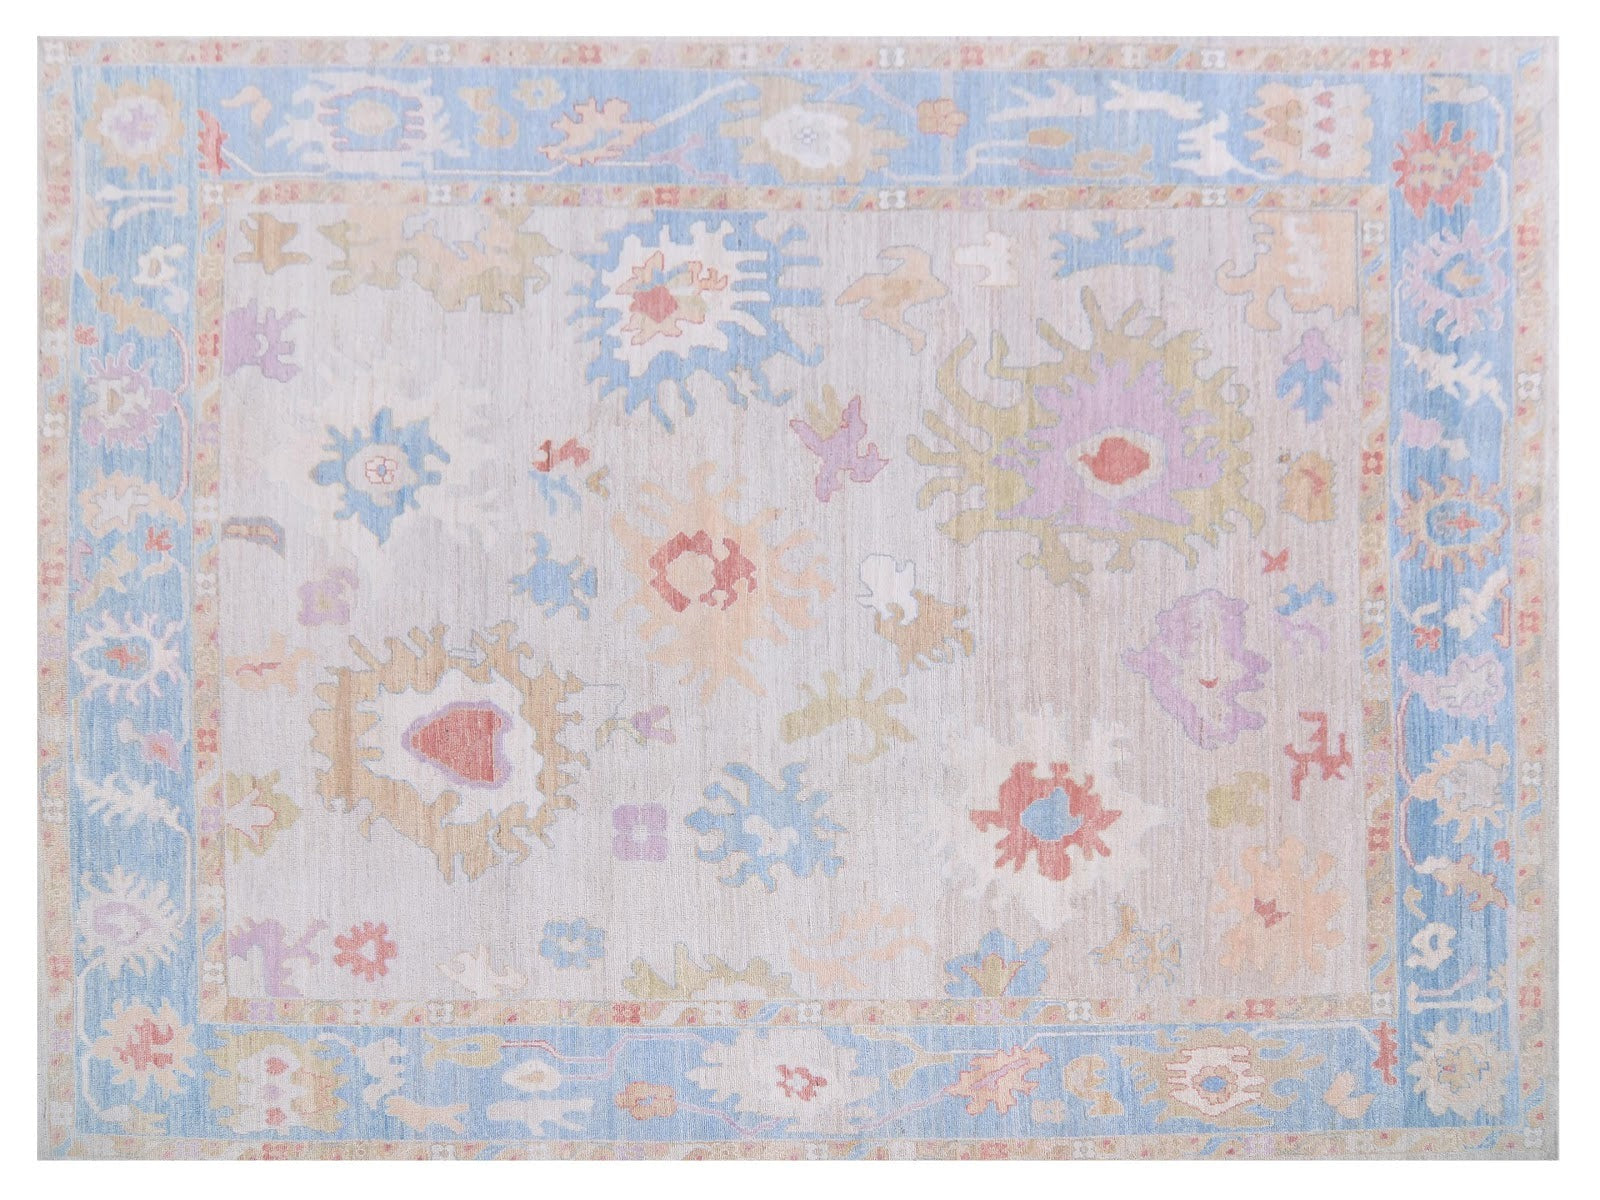 9x12 Faberge rug in transitional design featuring pinks, blues, and oranges, framed by a light blue border, hand-knotted in 100% wool